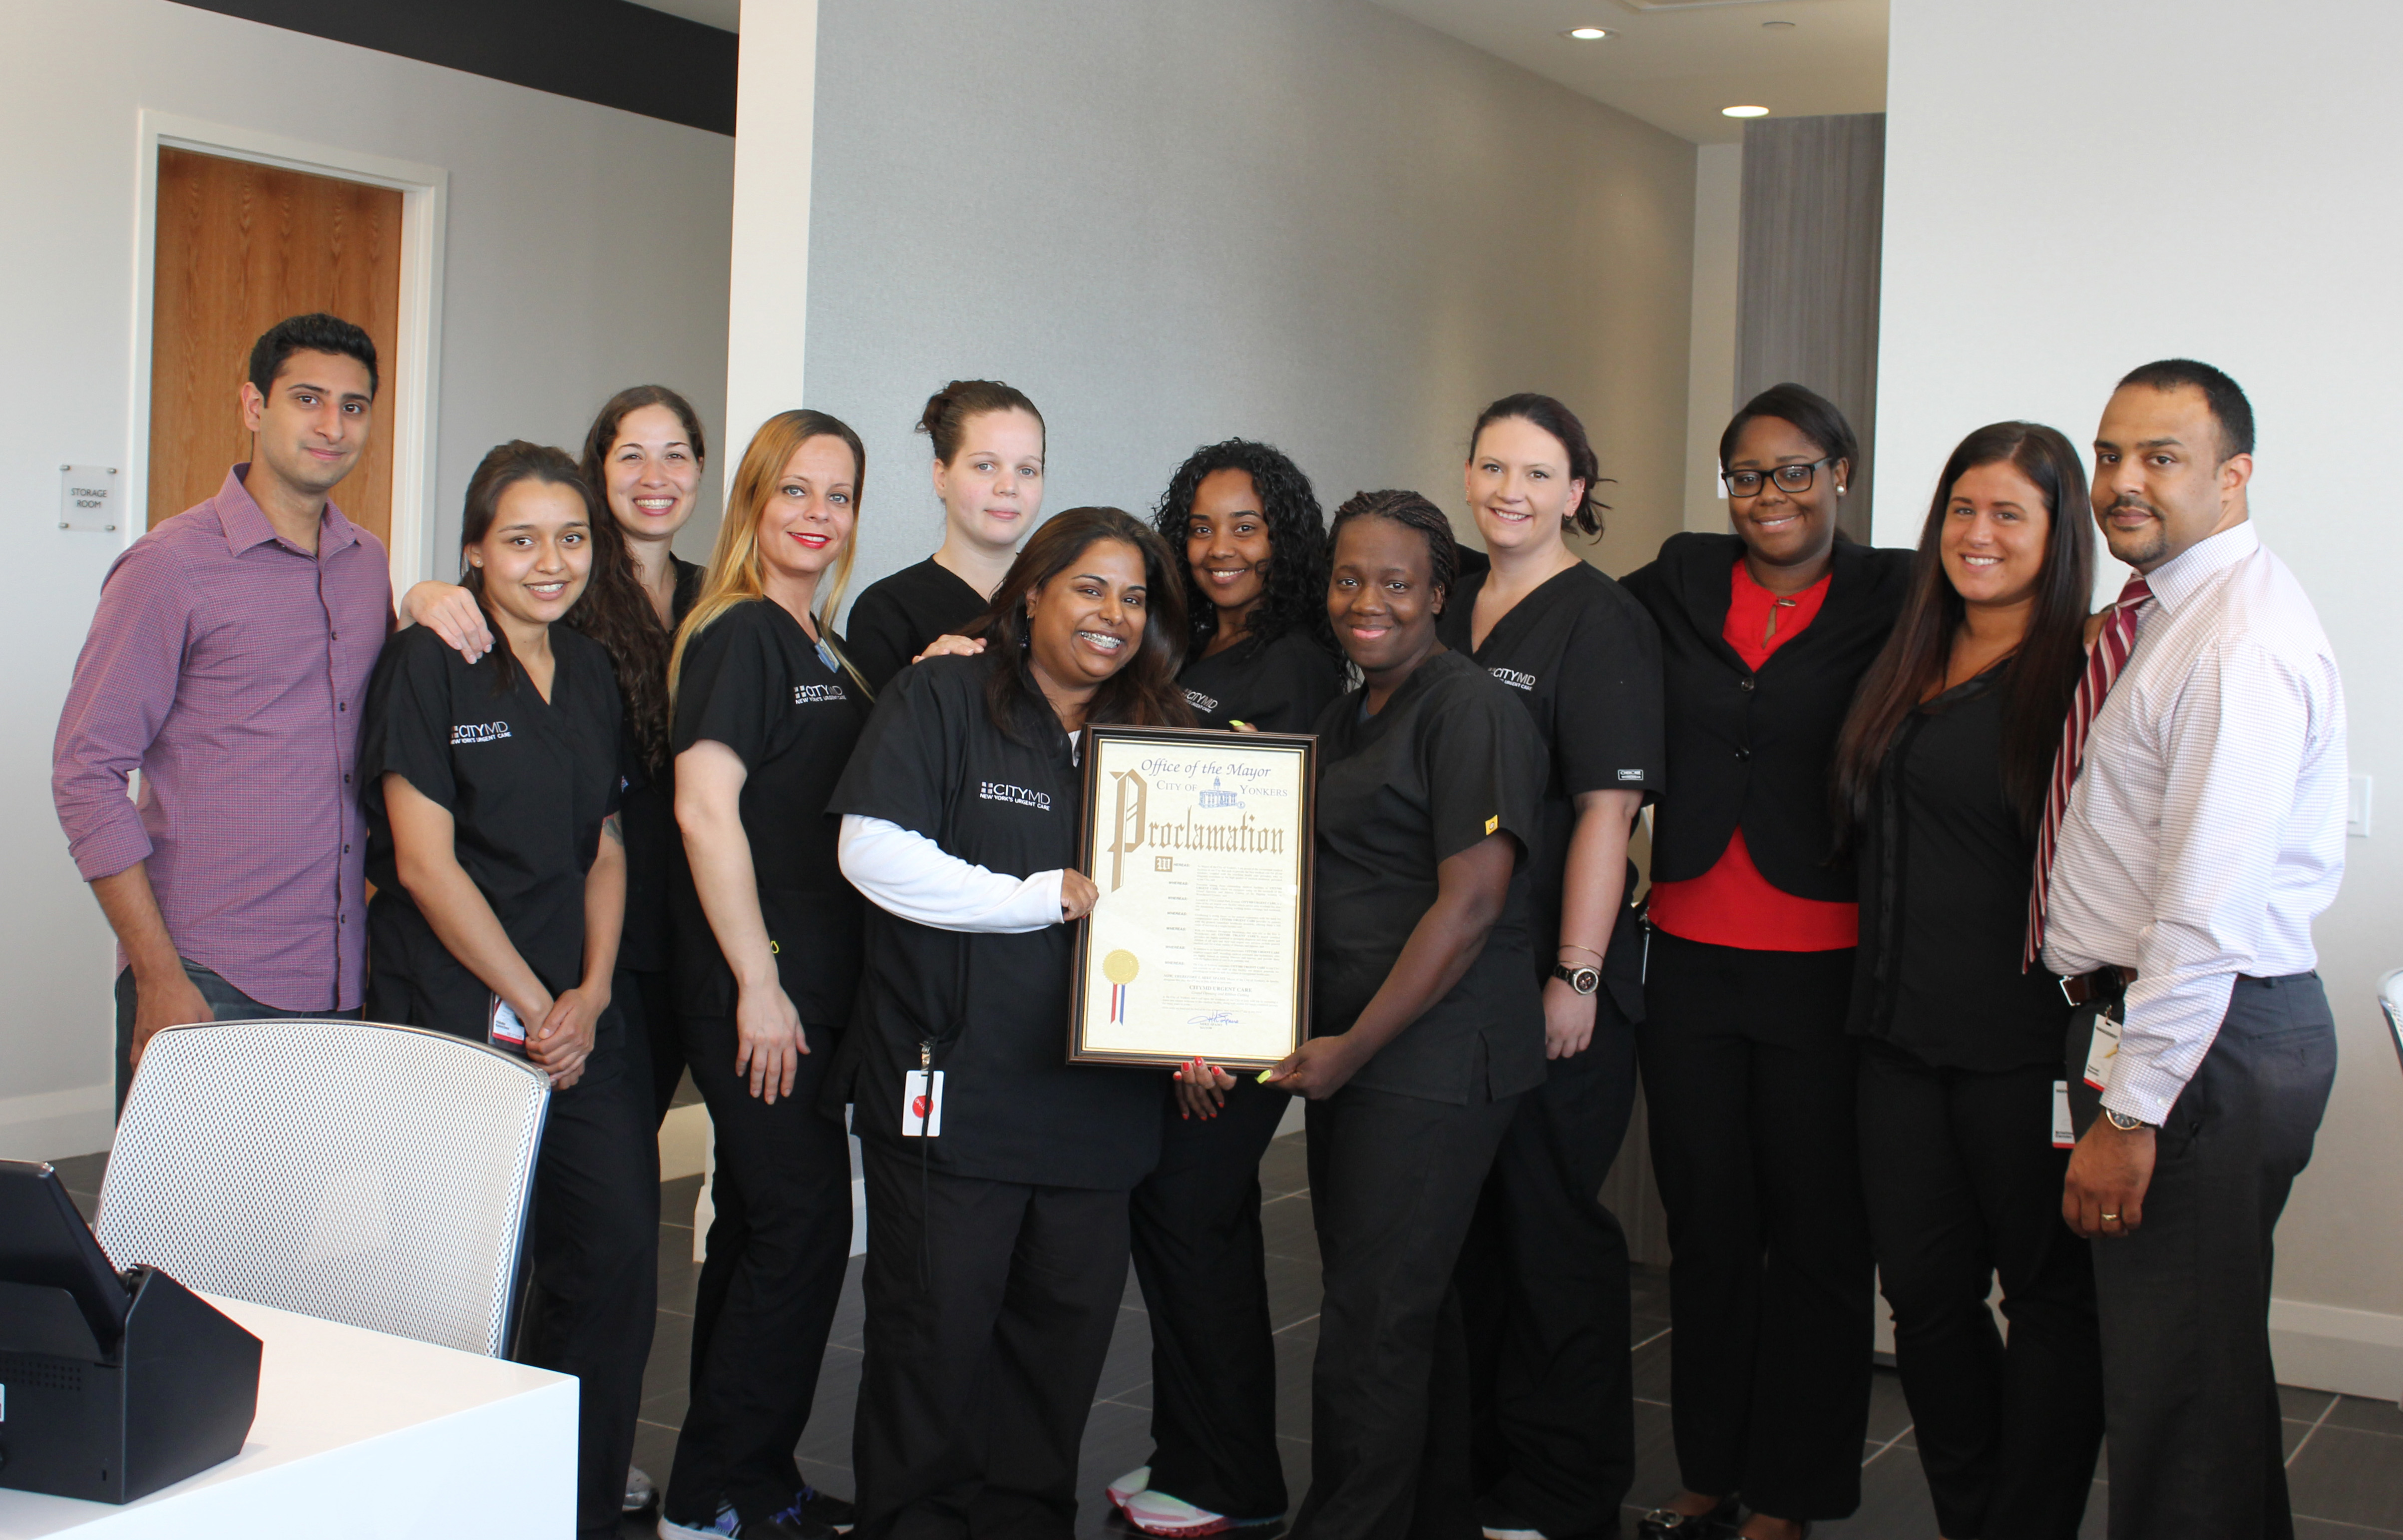 Photo Caption 2: CityMD staff displays the City of Yonkers Proclamation.